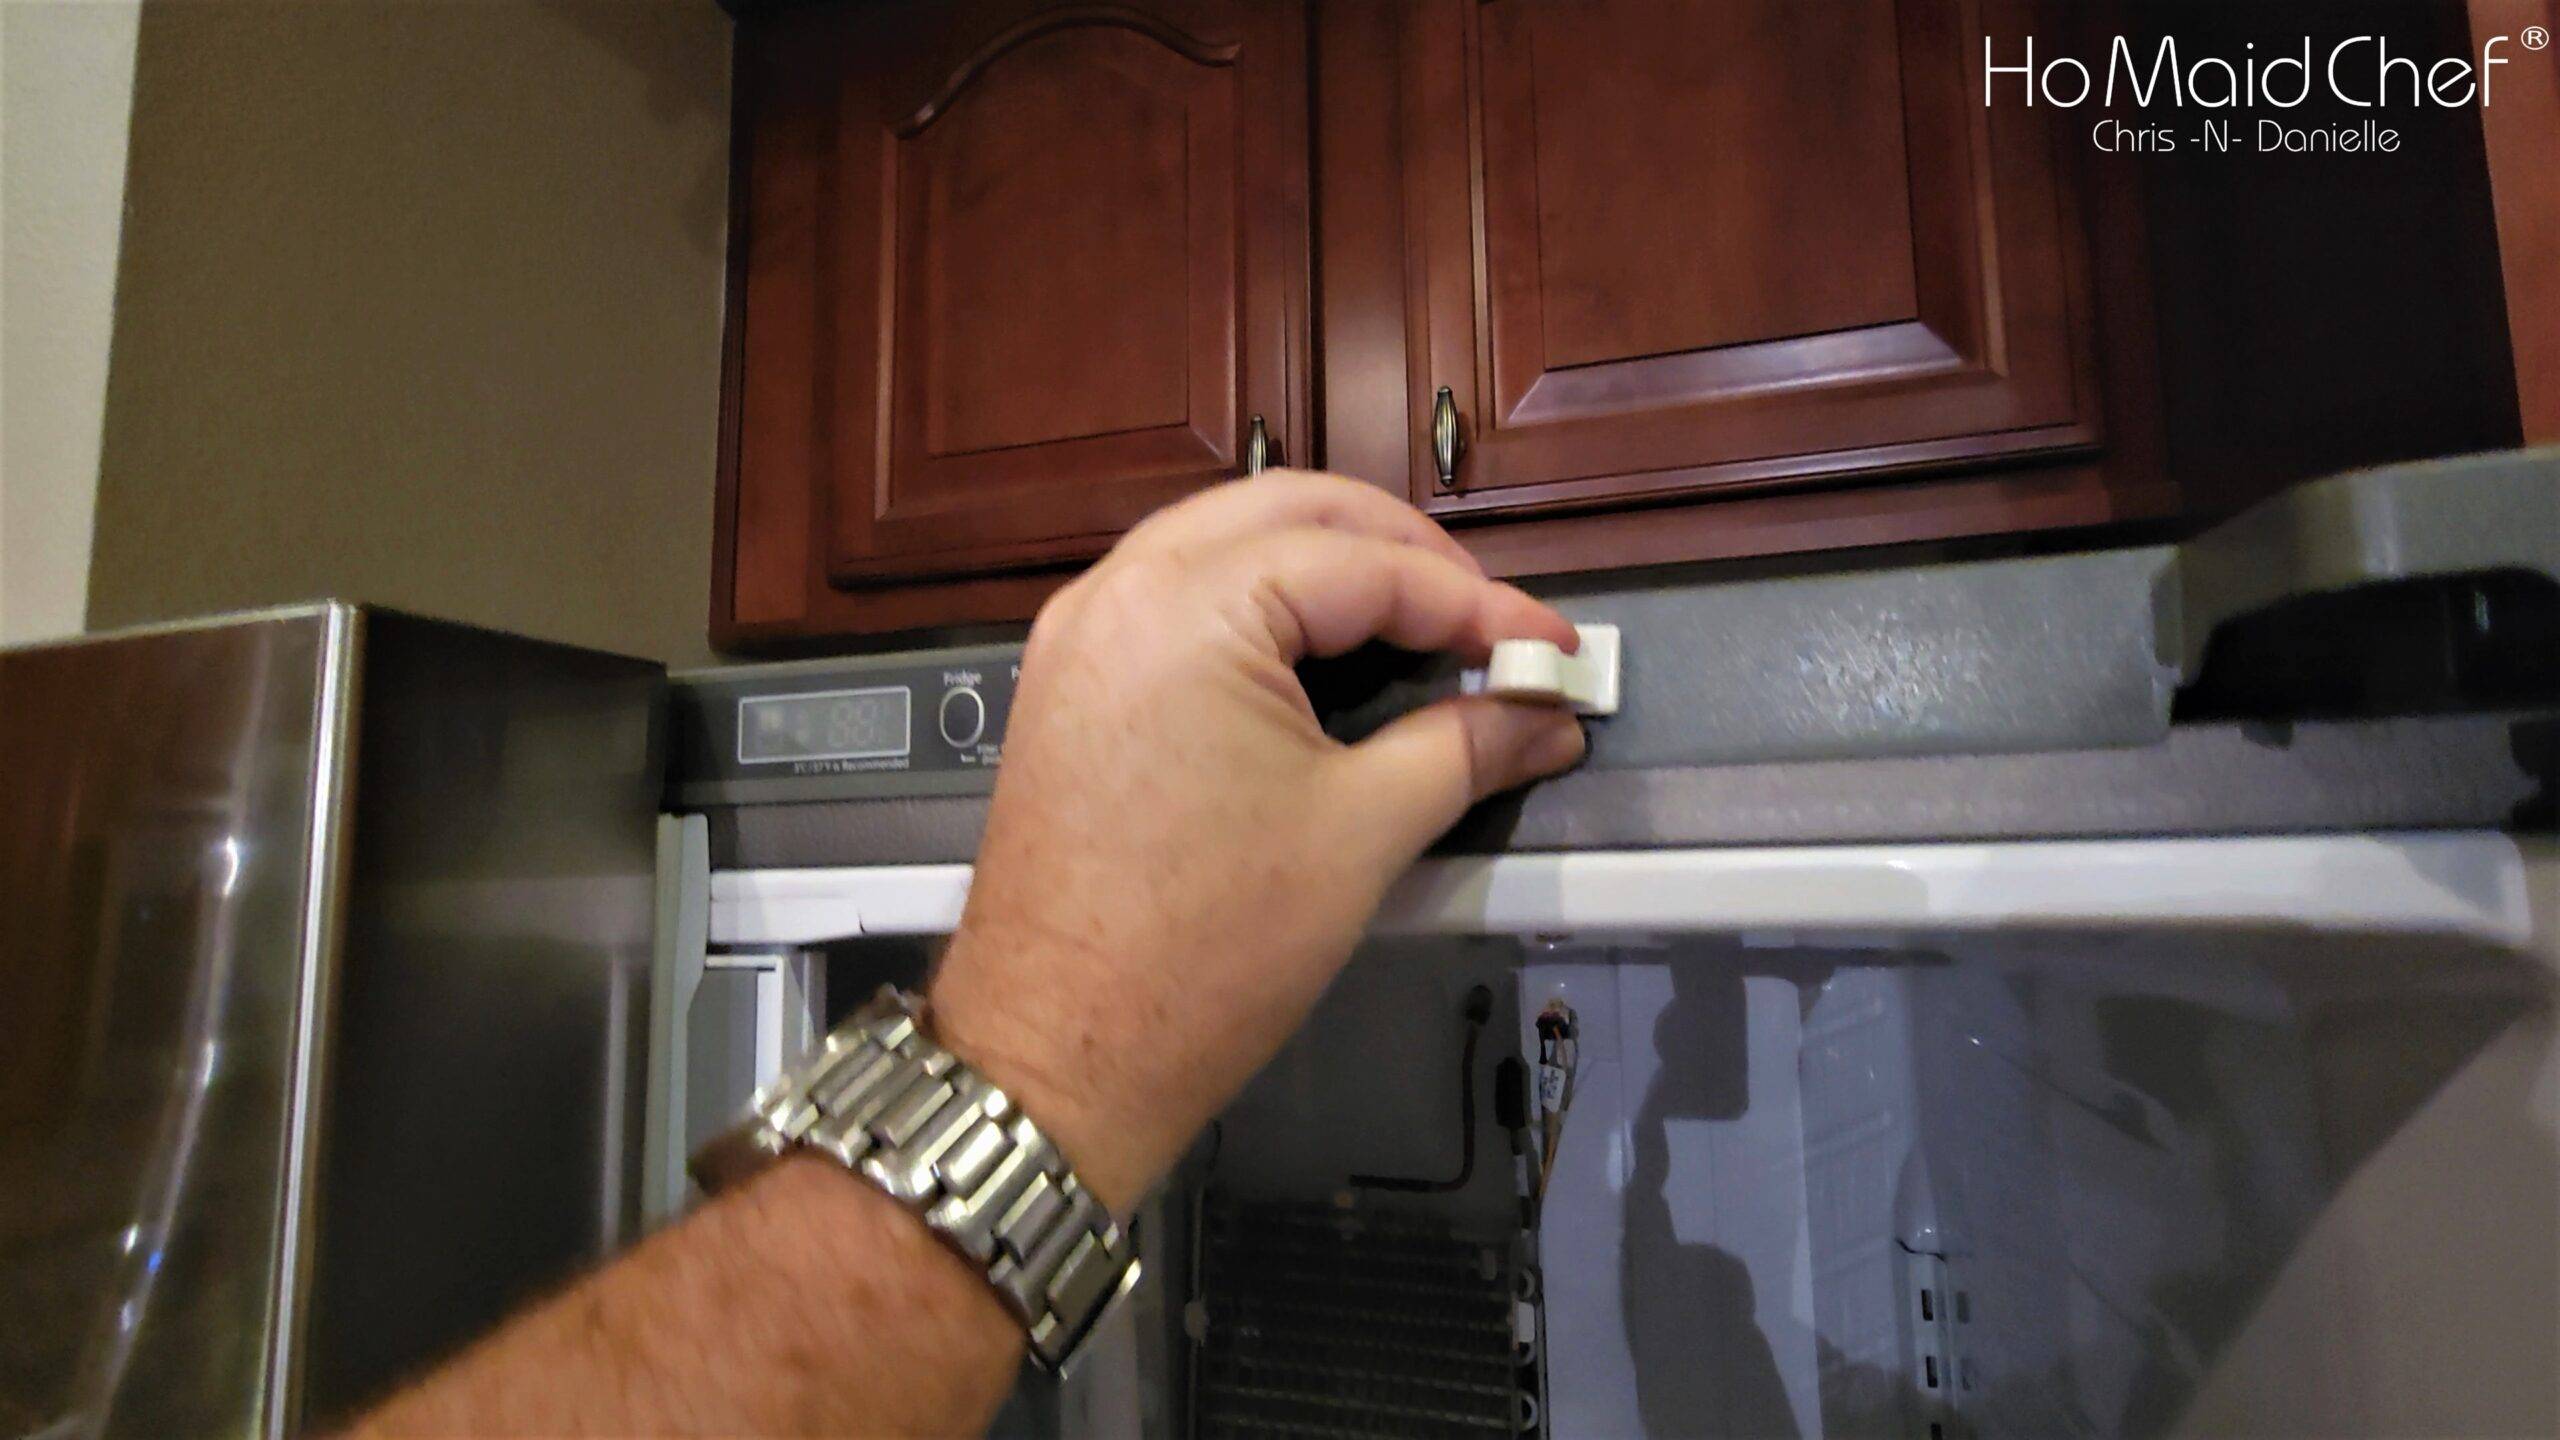 How To Test Samsung Fridge With Door Open - Chris Does What